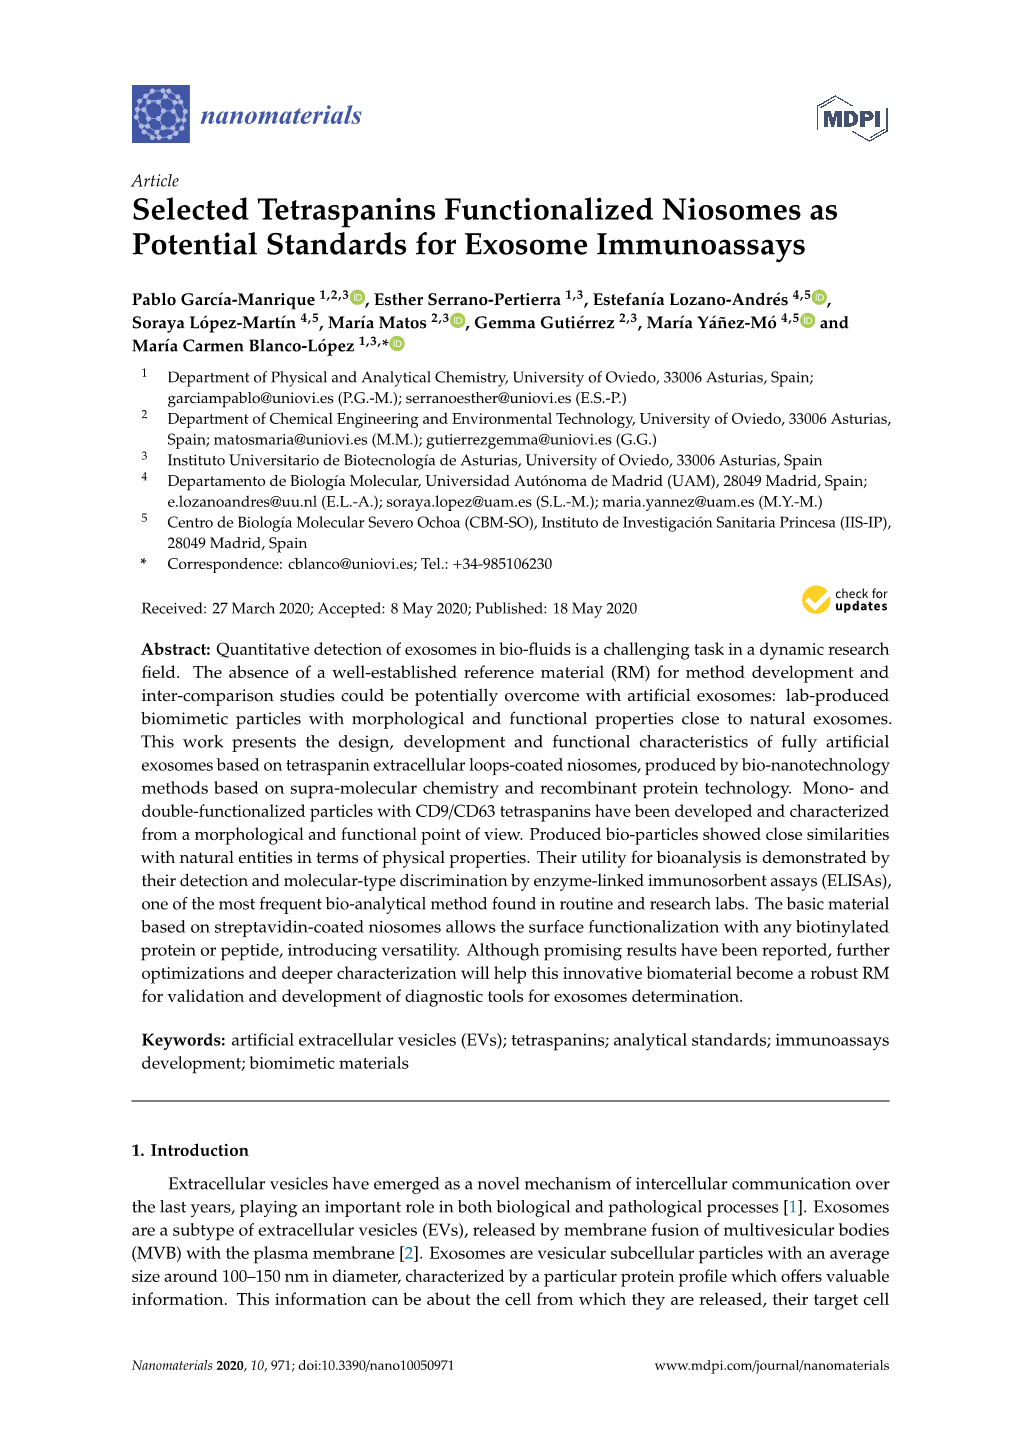 Selected Tetraspanins Functionalized Niosomes As Potential Standards for Exosome Immunoassays